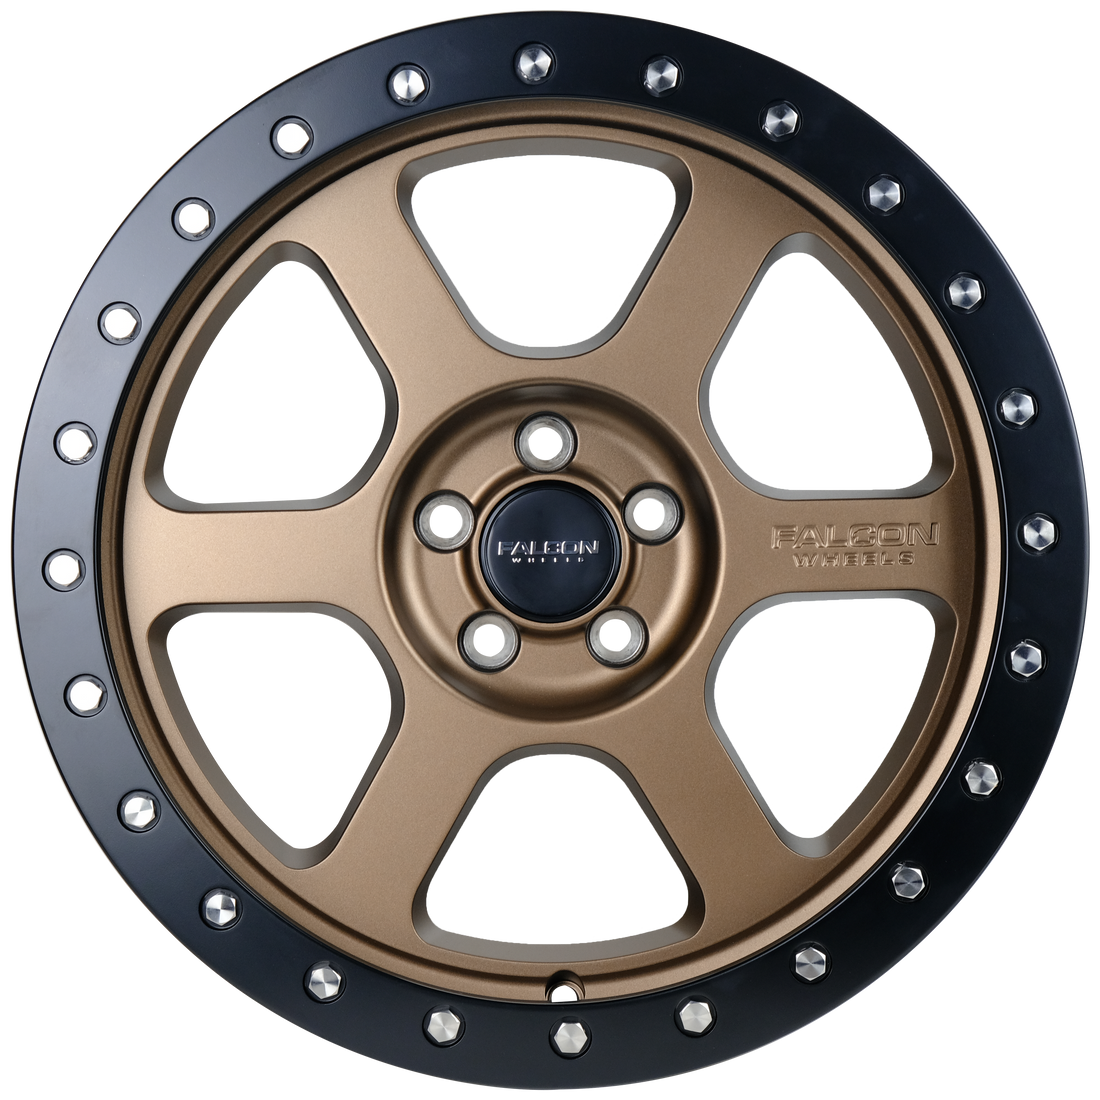 Falcon Wheels V1 17x8 in Matte Bronze - Roam Overland Outfitters